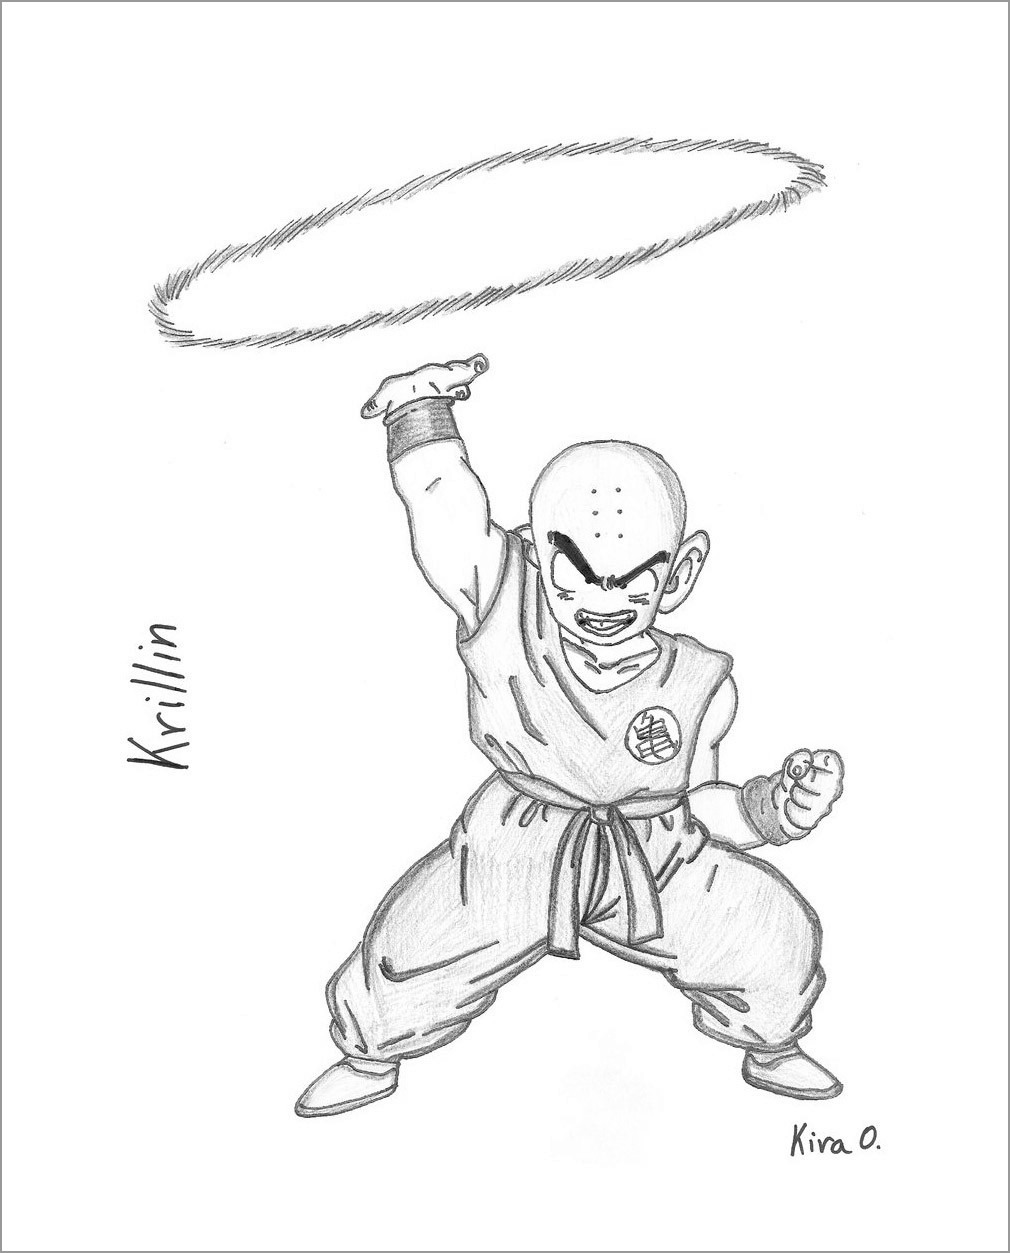 cute dragon ball coloring pages